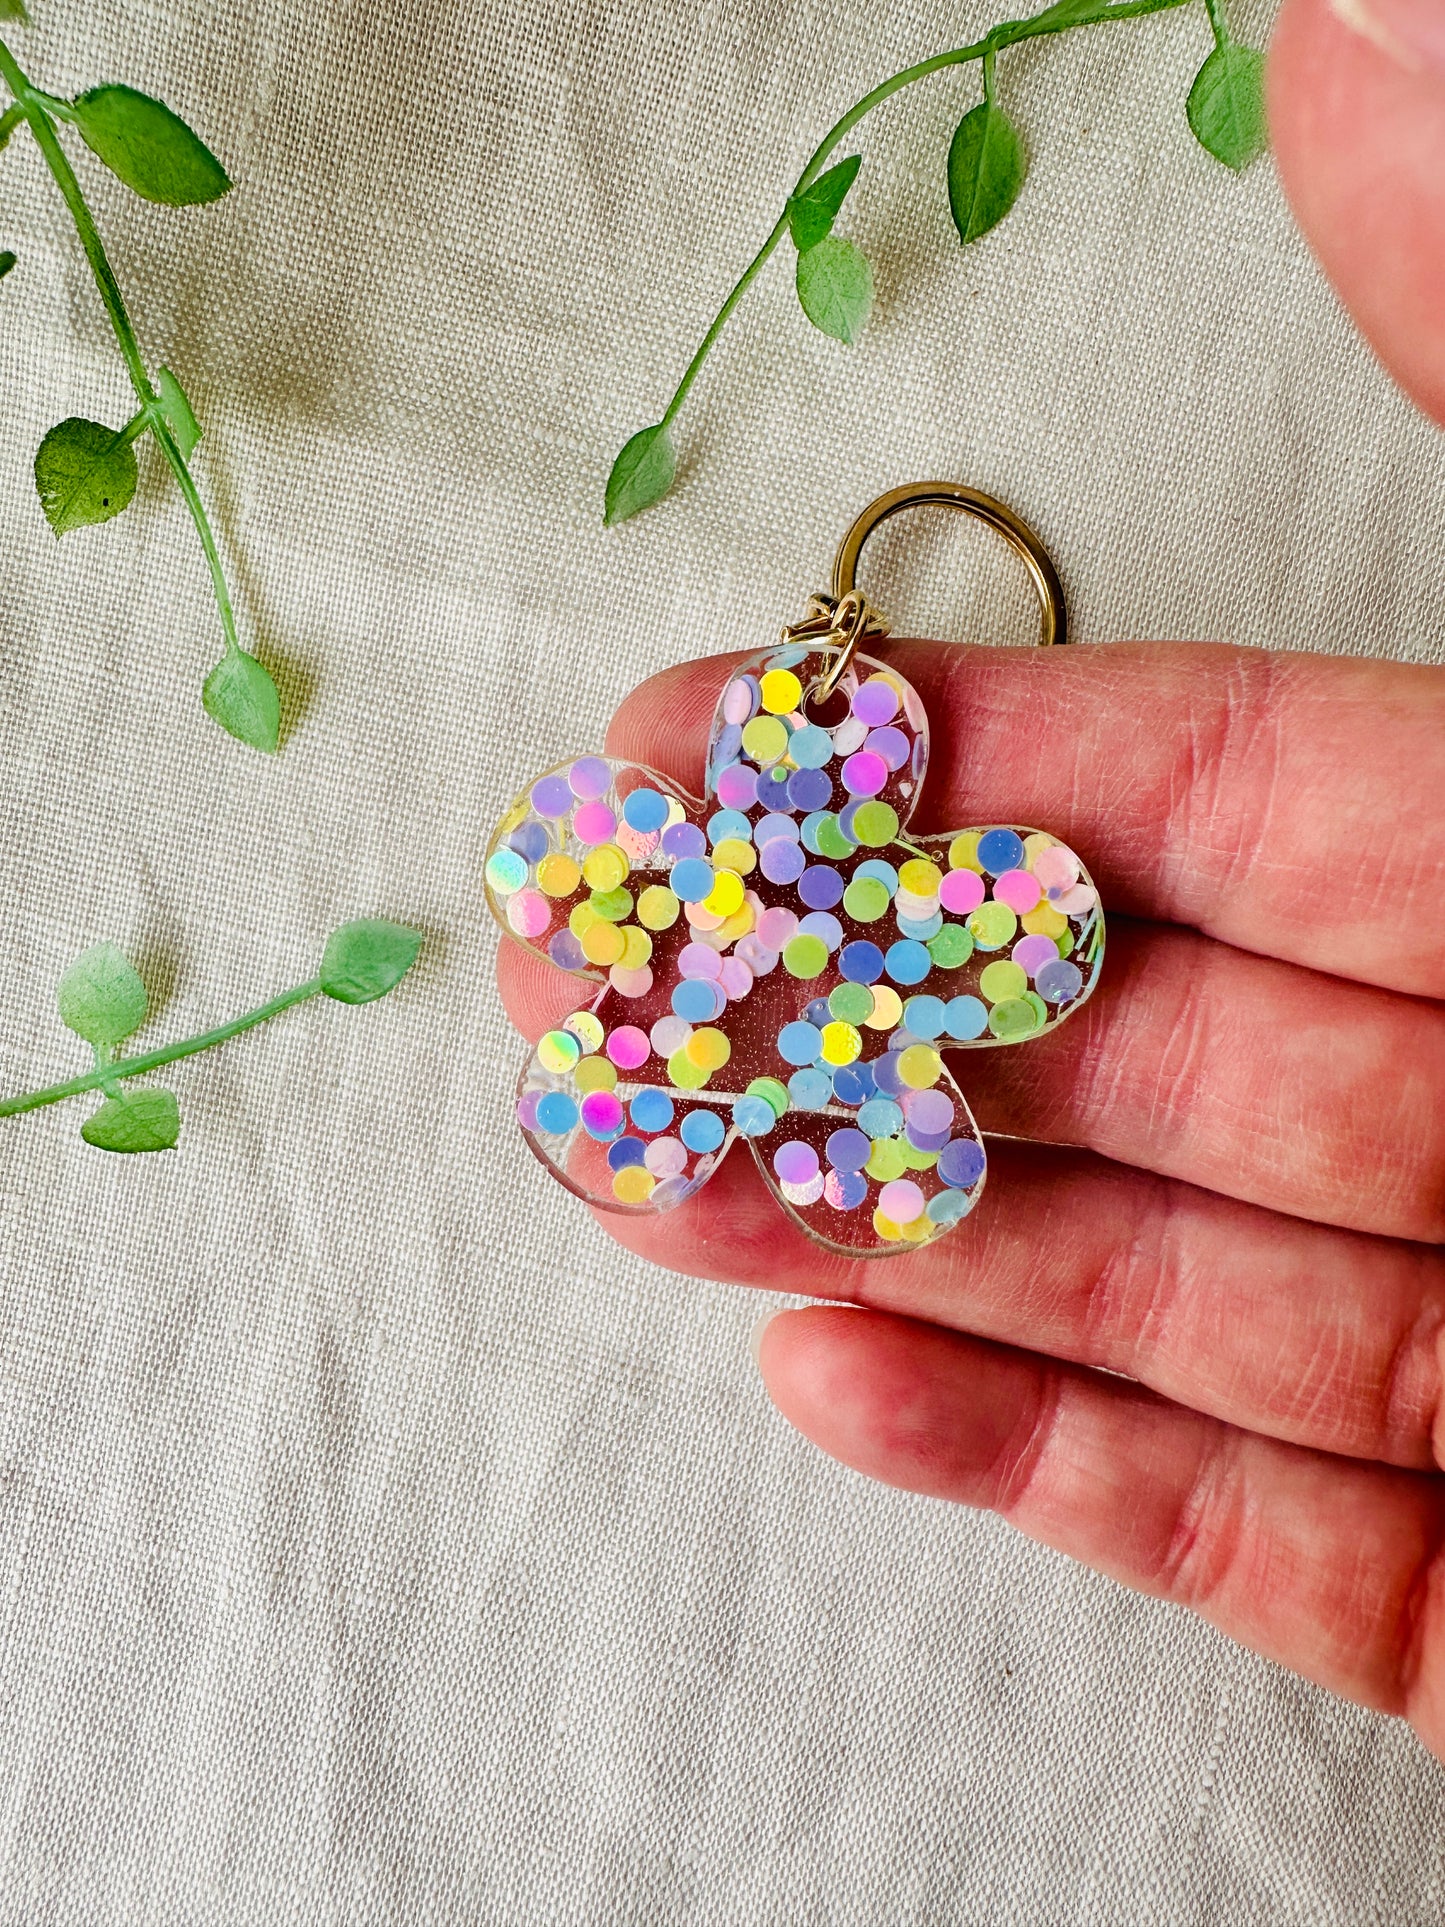 Assorted keychains - colourful and fun